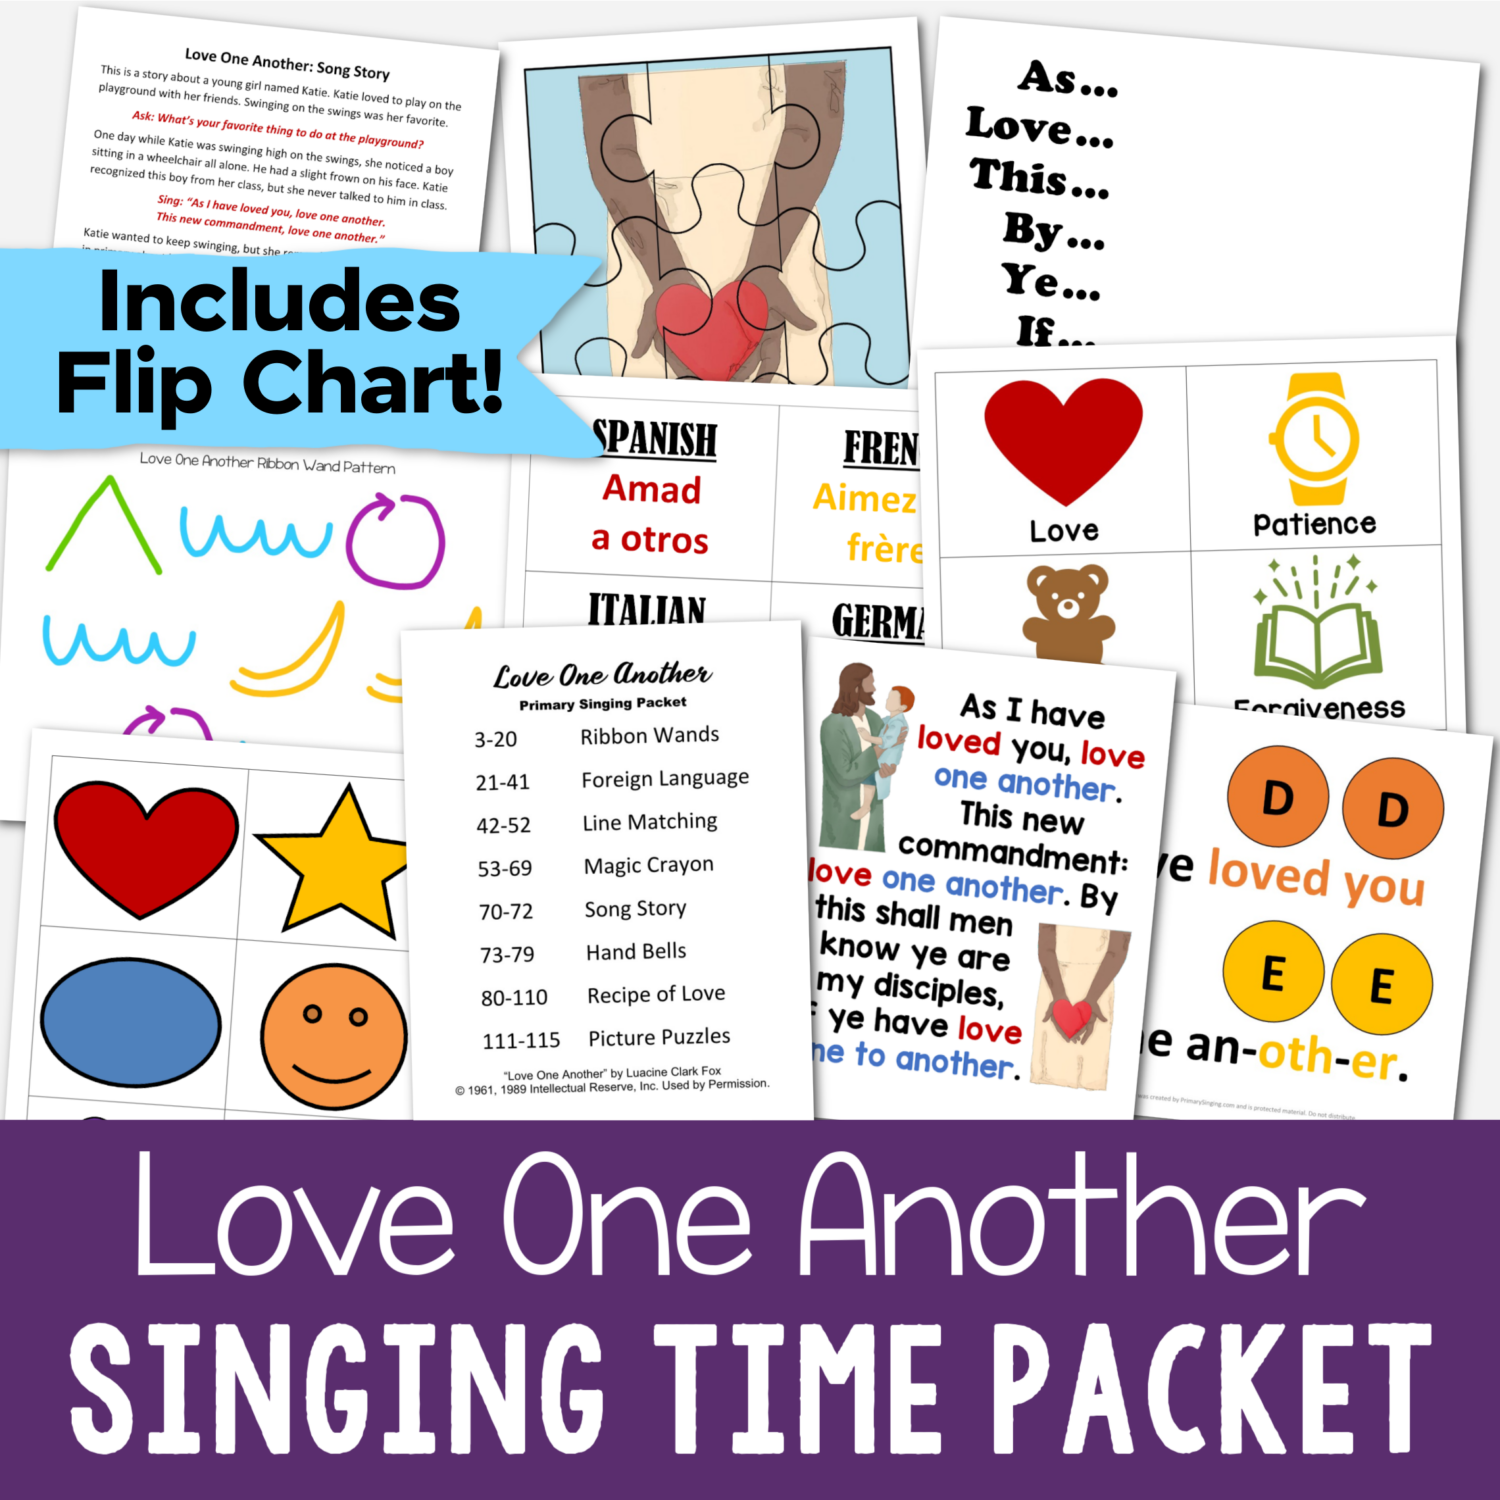 Love One Another Singing time packet for this lovely primary song - easy ways for LDS Primary music leaders to teach this song including a beautiful custom art flip chart, hand bells, magic crayon, foreign language, ribbon wands, line match, and song story activities.